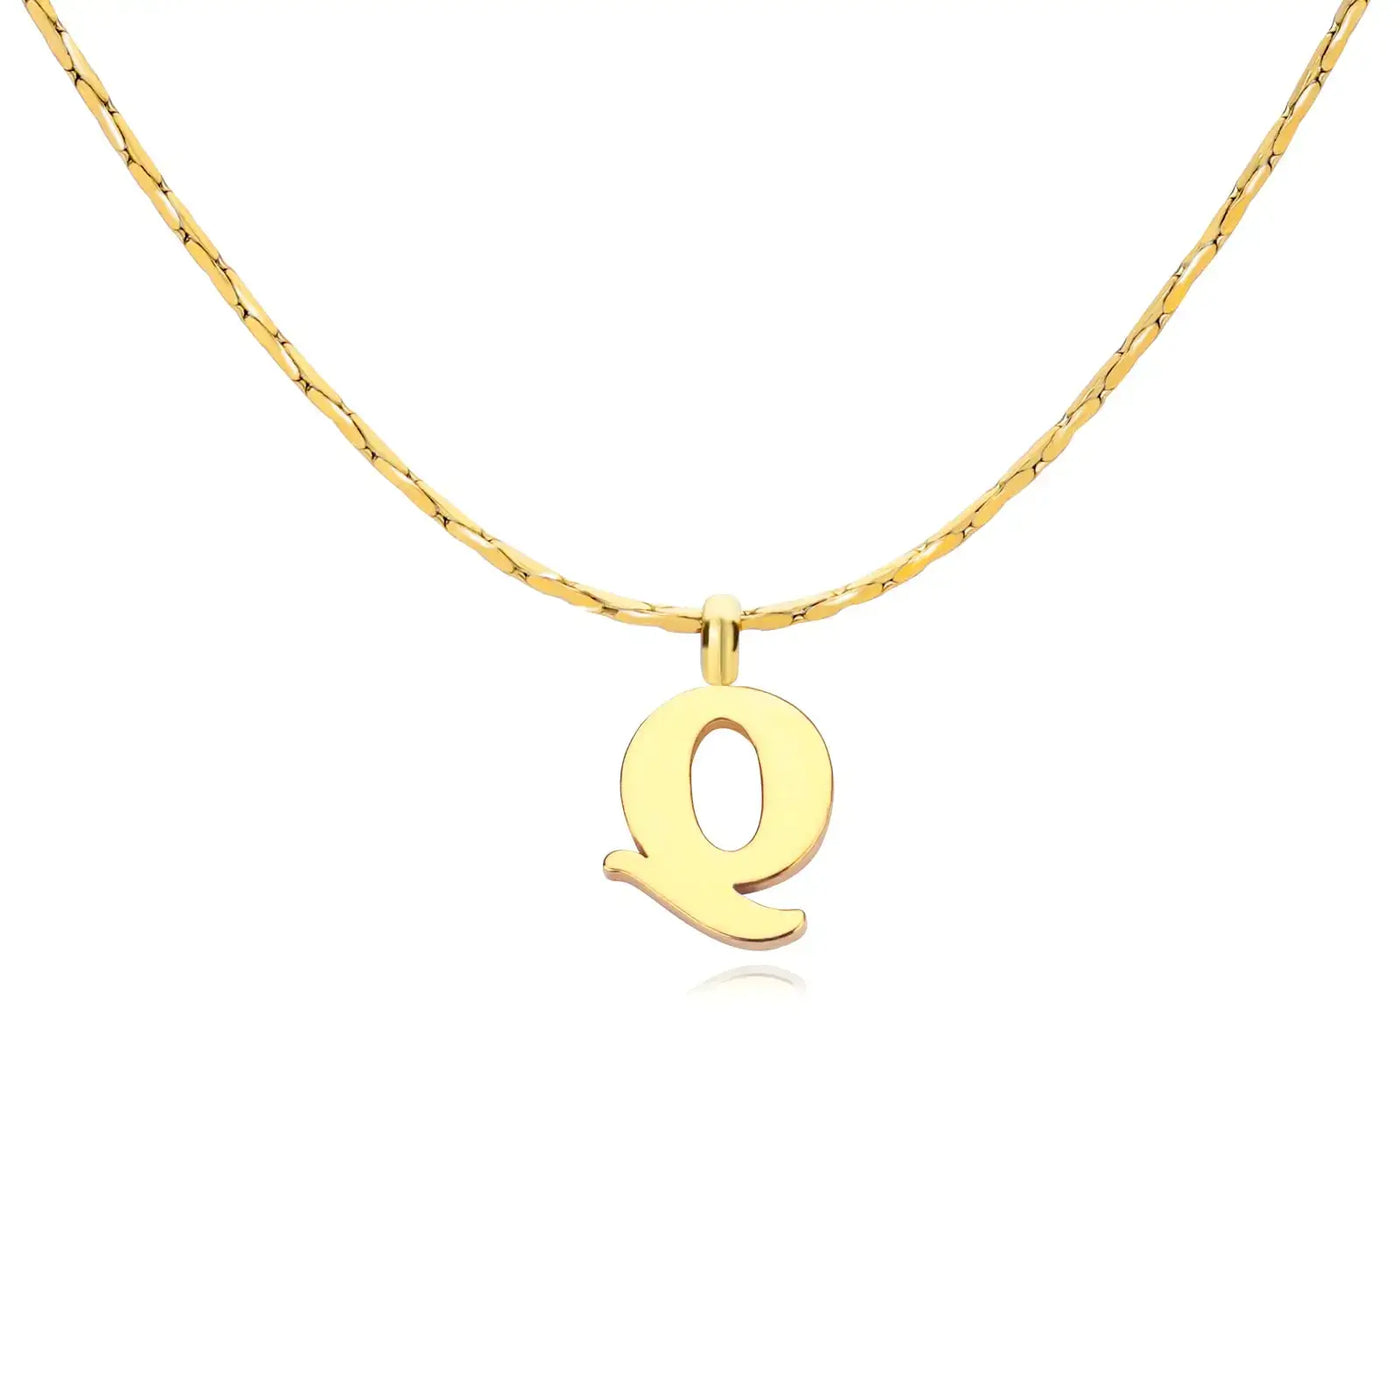 Letter necklace 18k Gold Plated